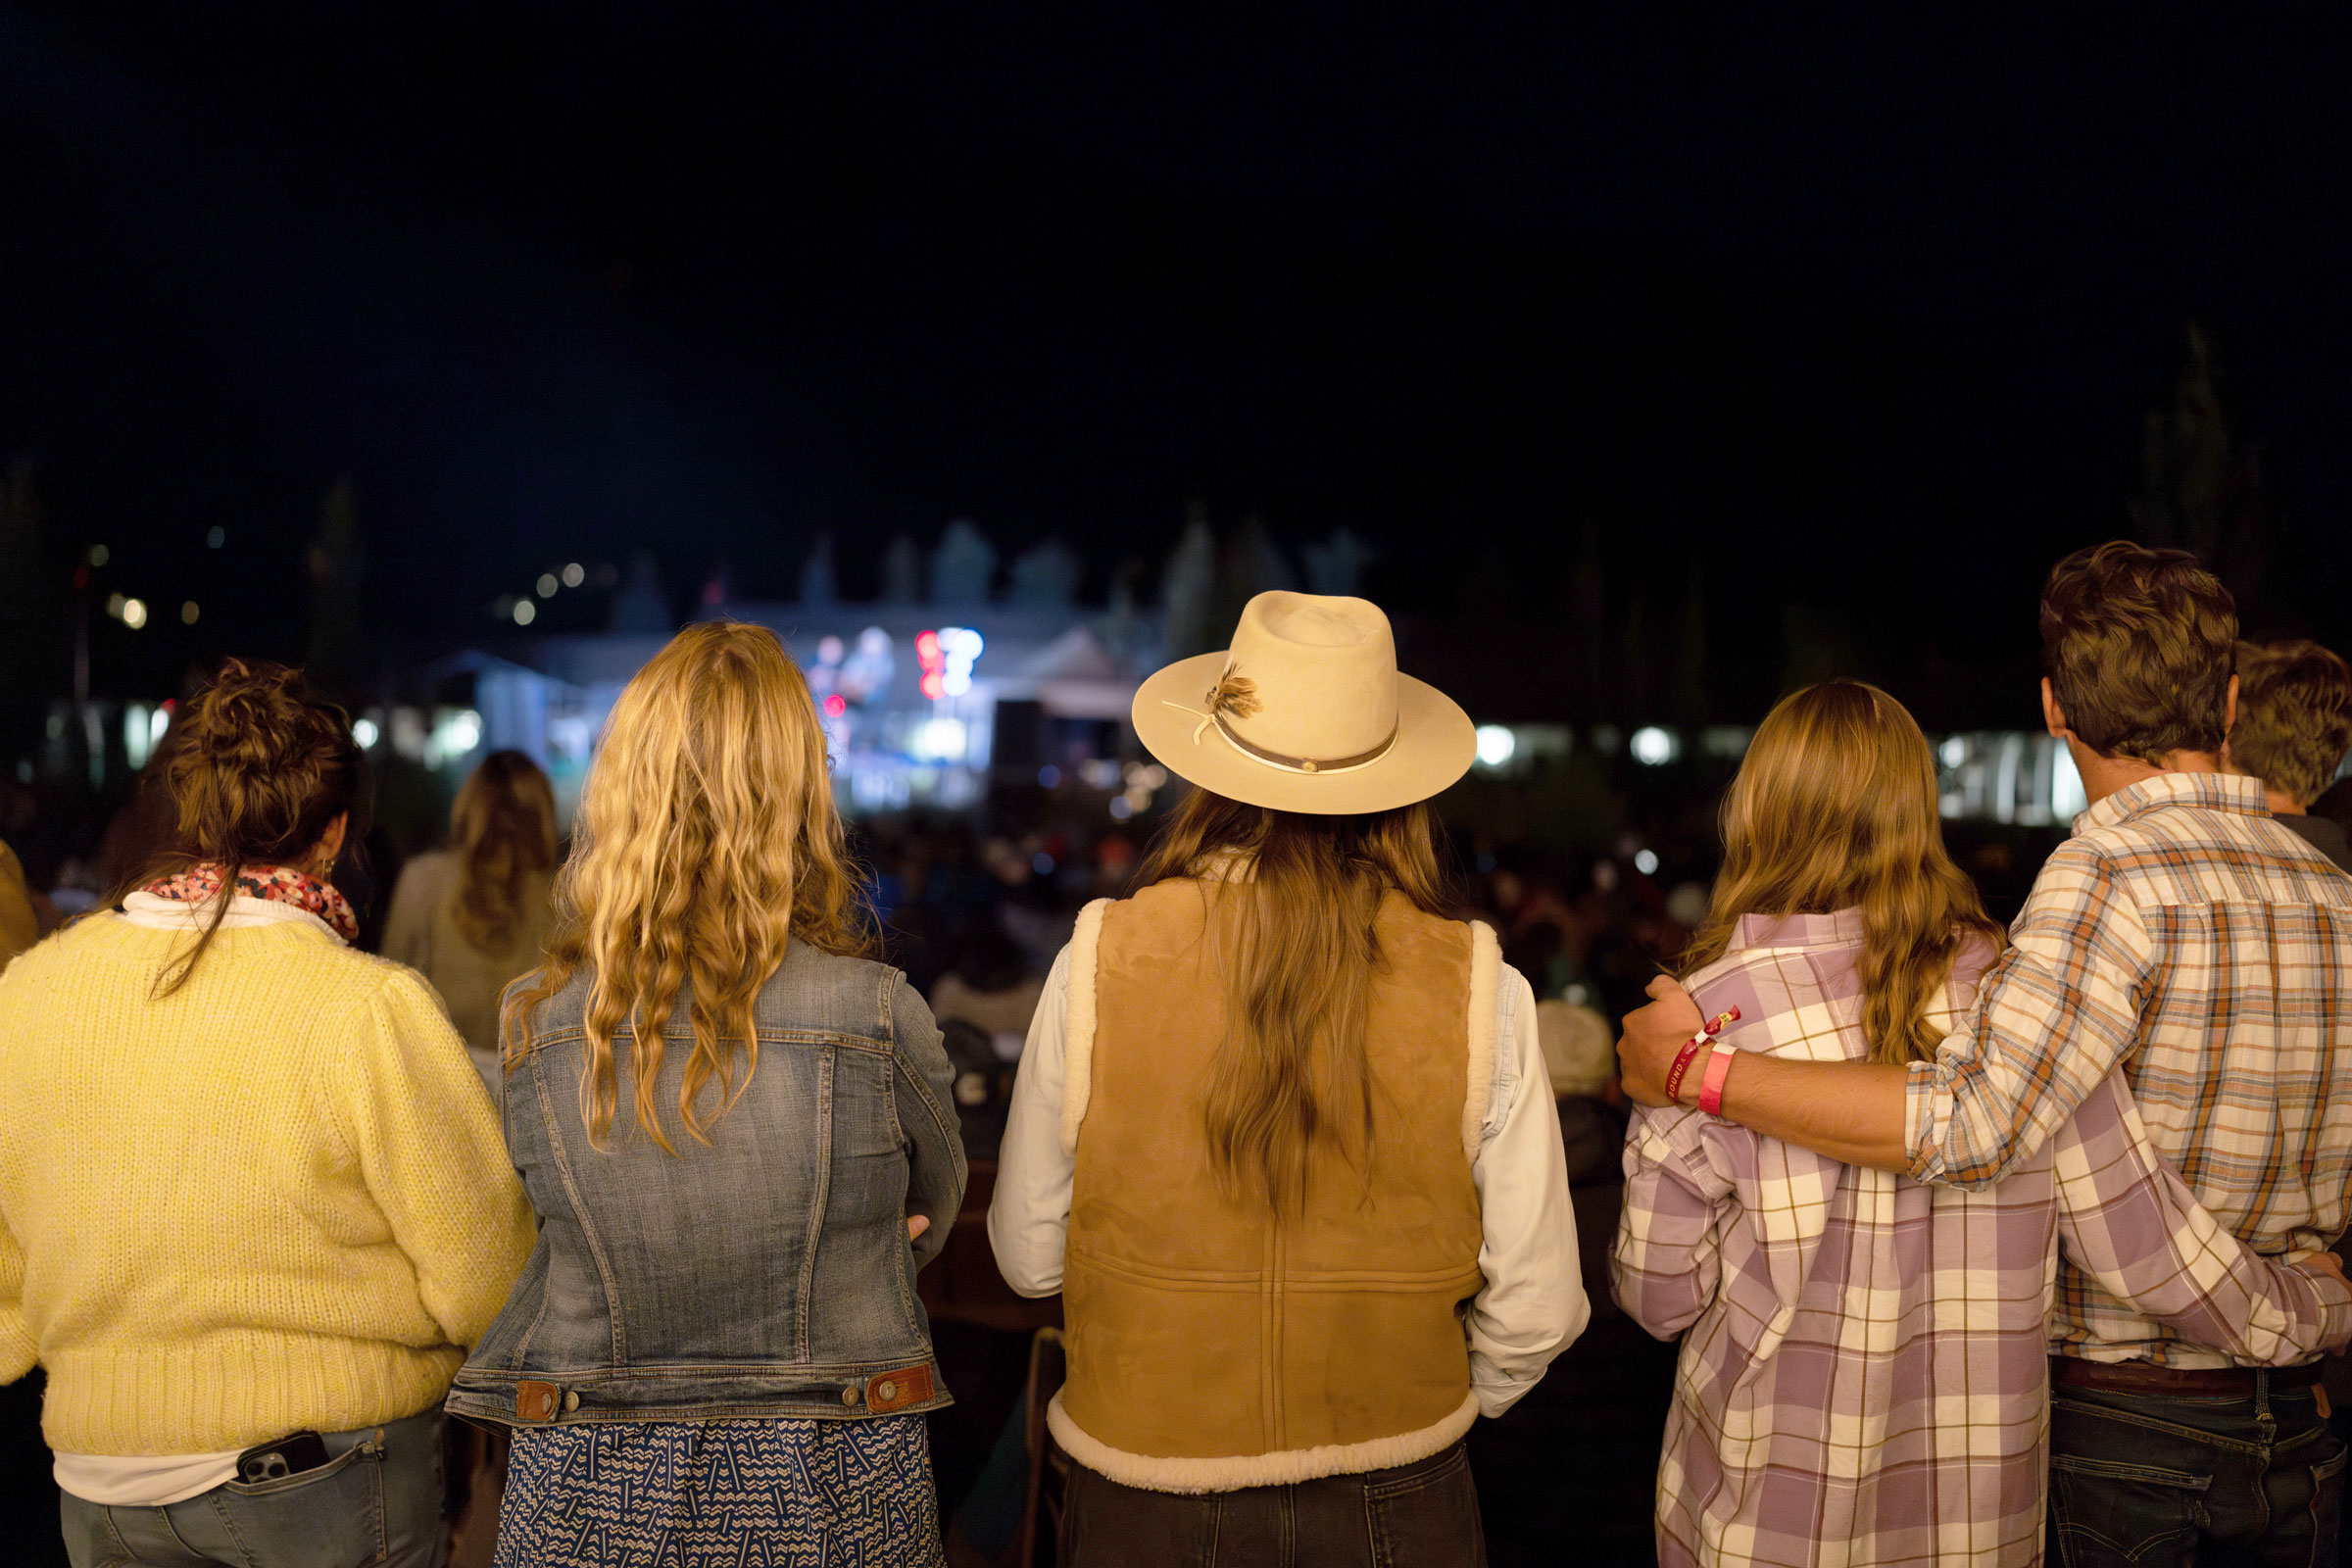 People revel in the night music concert in the open ground, embracing the lively atmosphere.